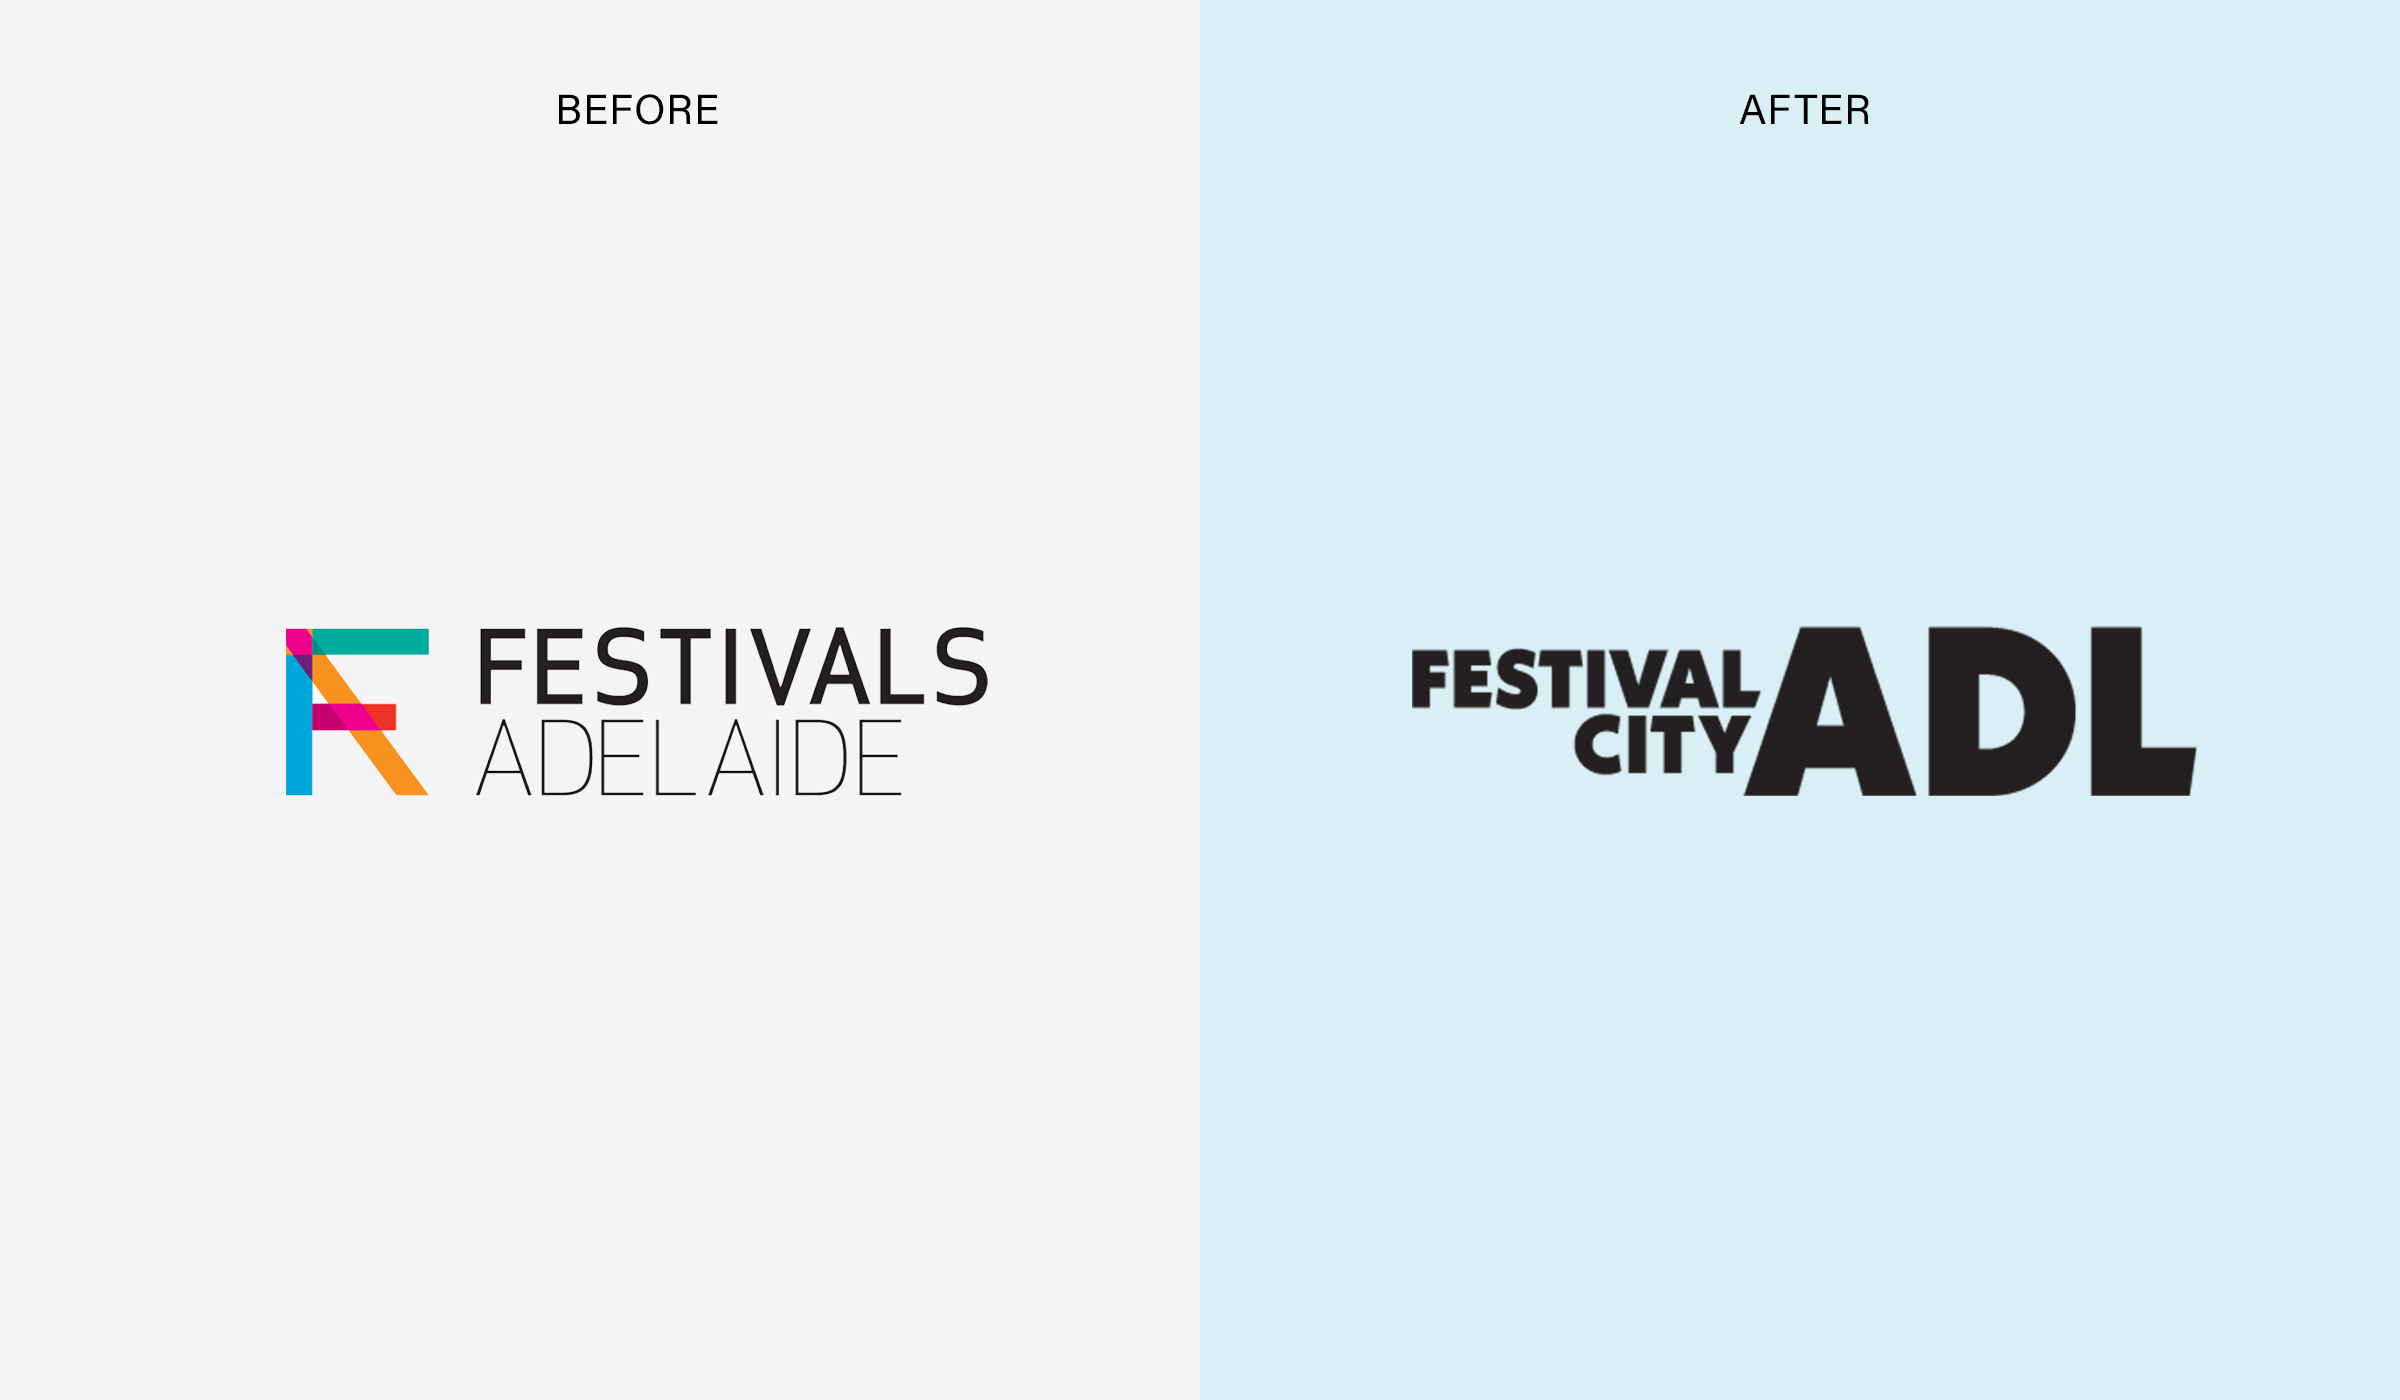 Festival City ADL logo before and after